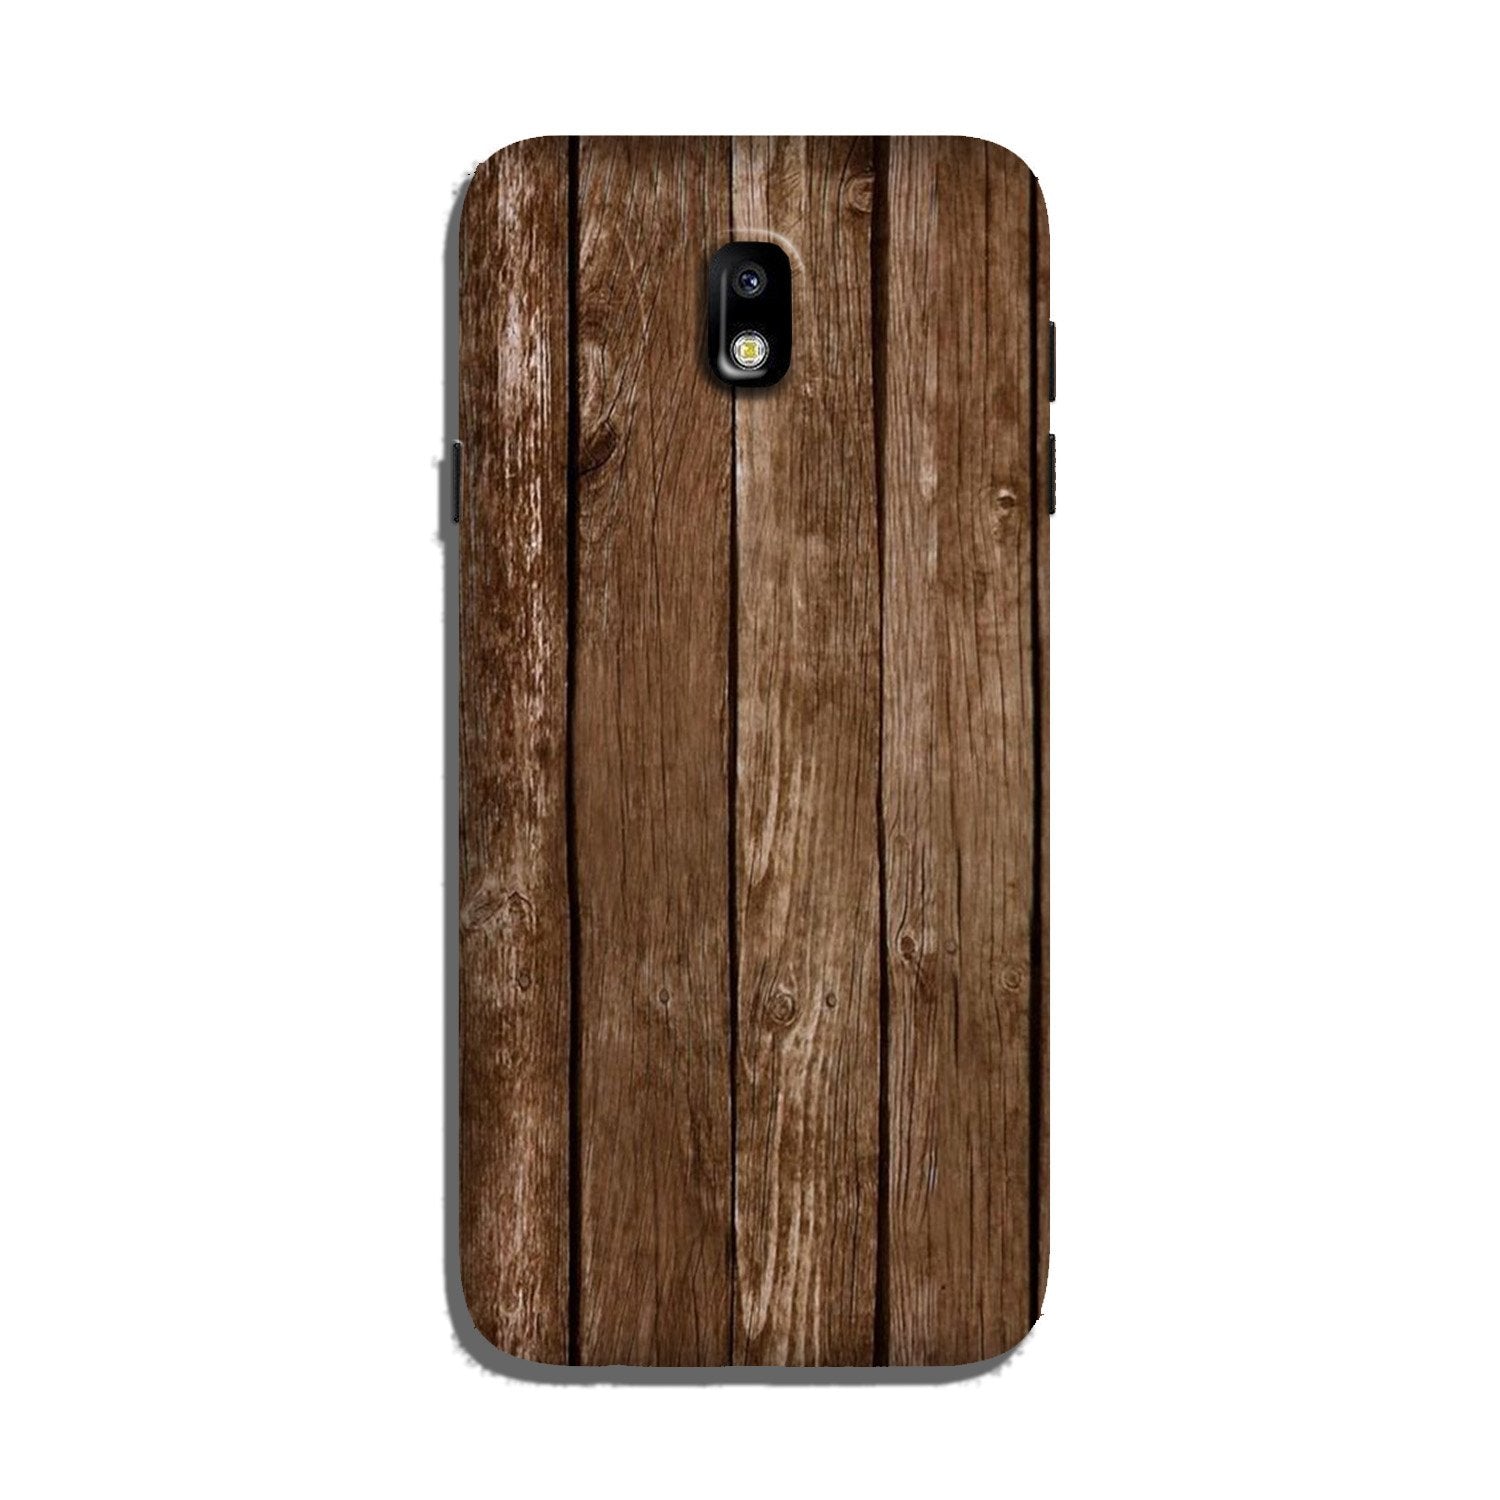 Wooden Look Case for Galaxy J5 Pro(Design - 112)